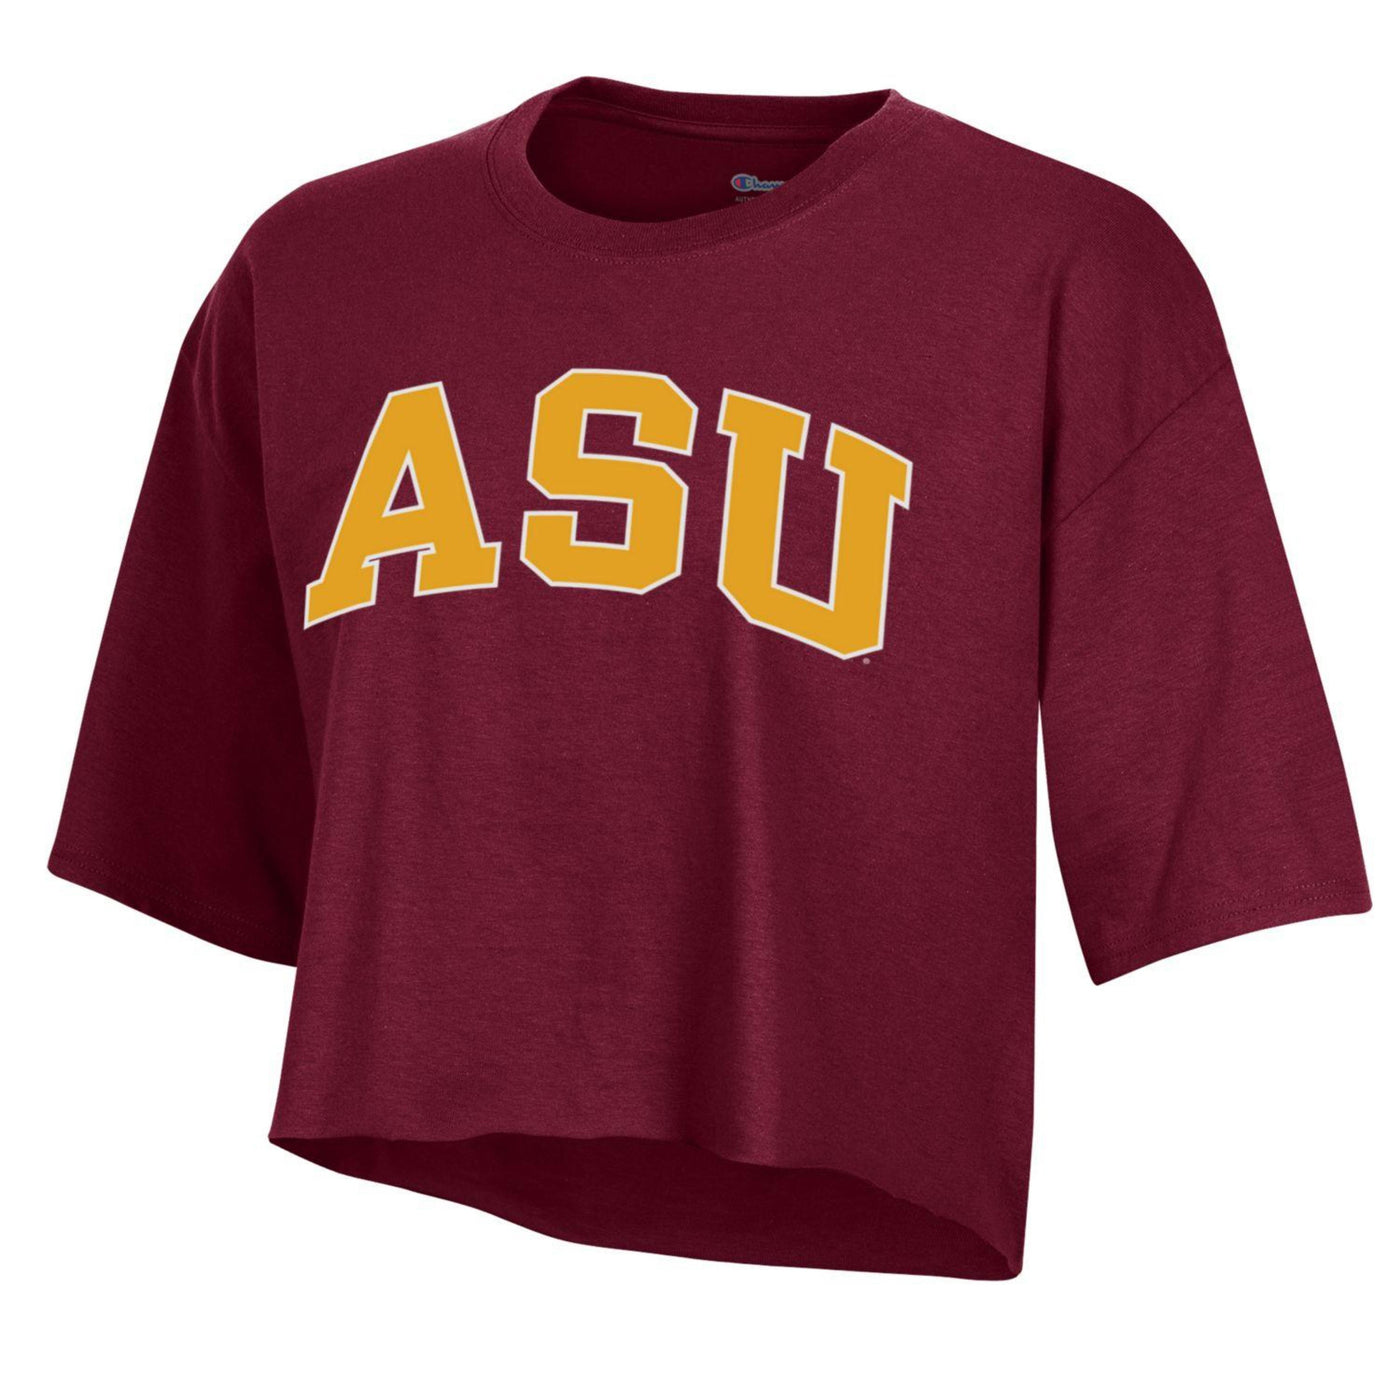 ASU maroon crop top with the large text